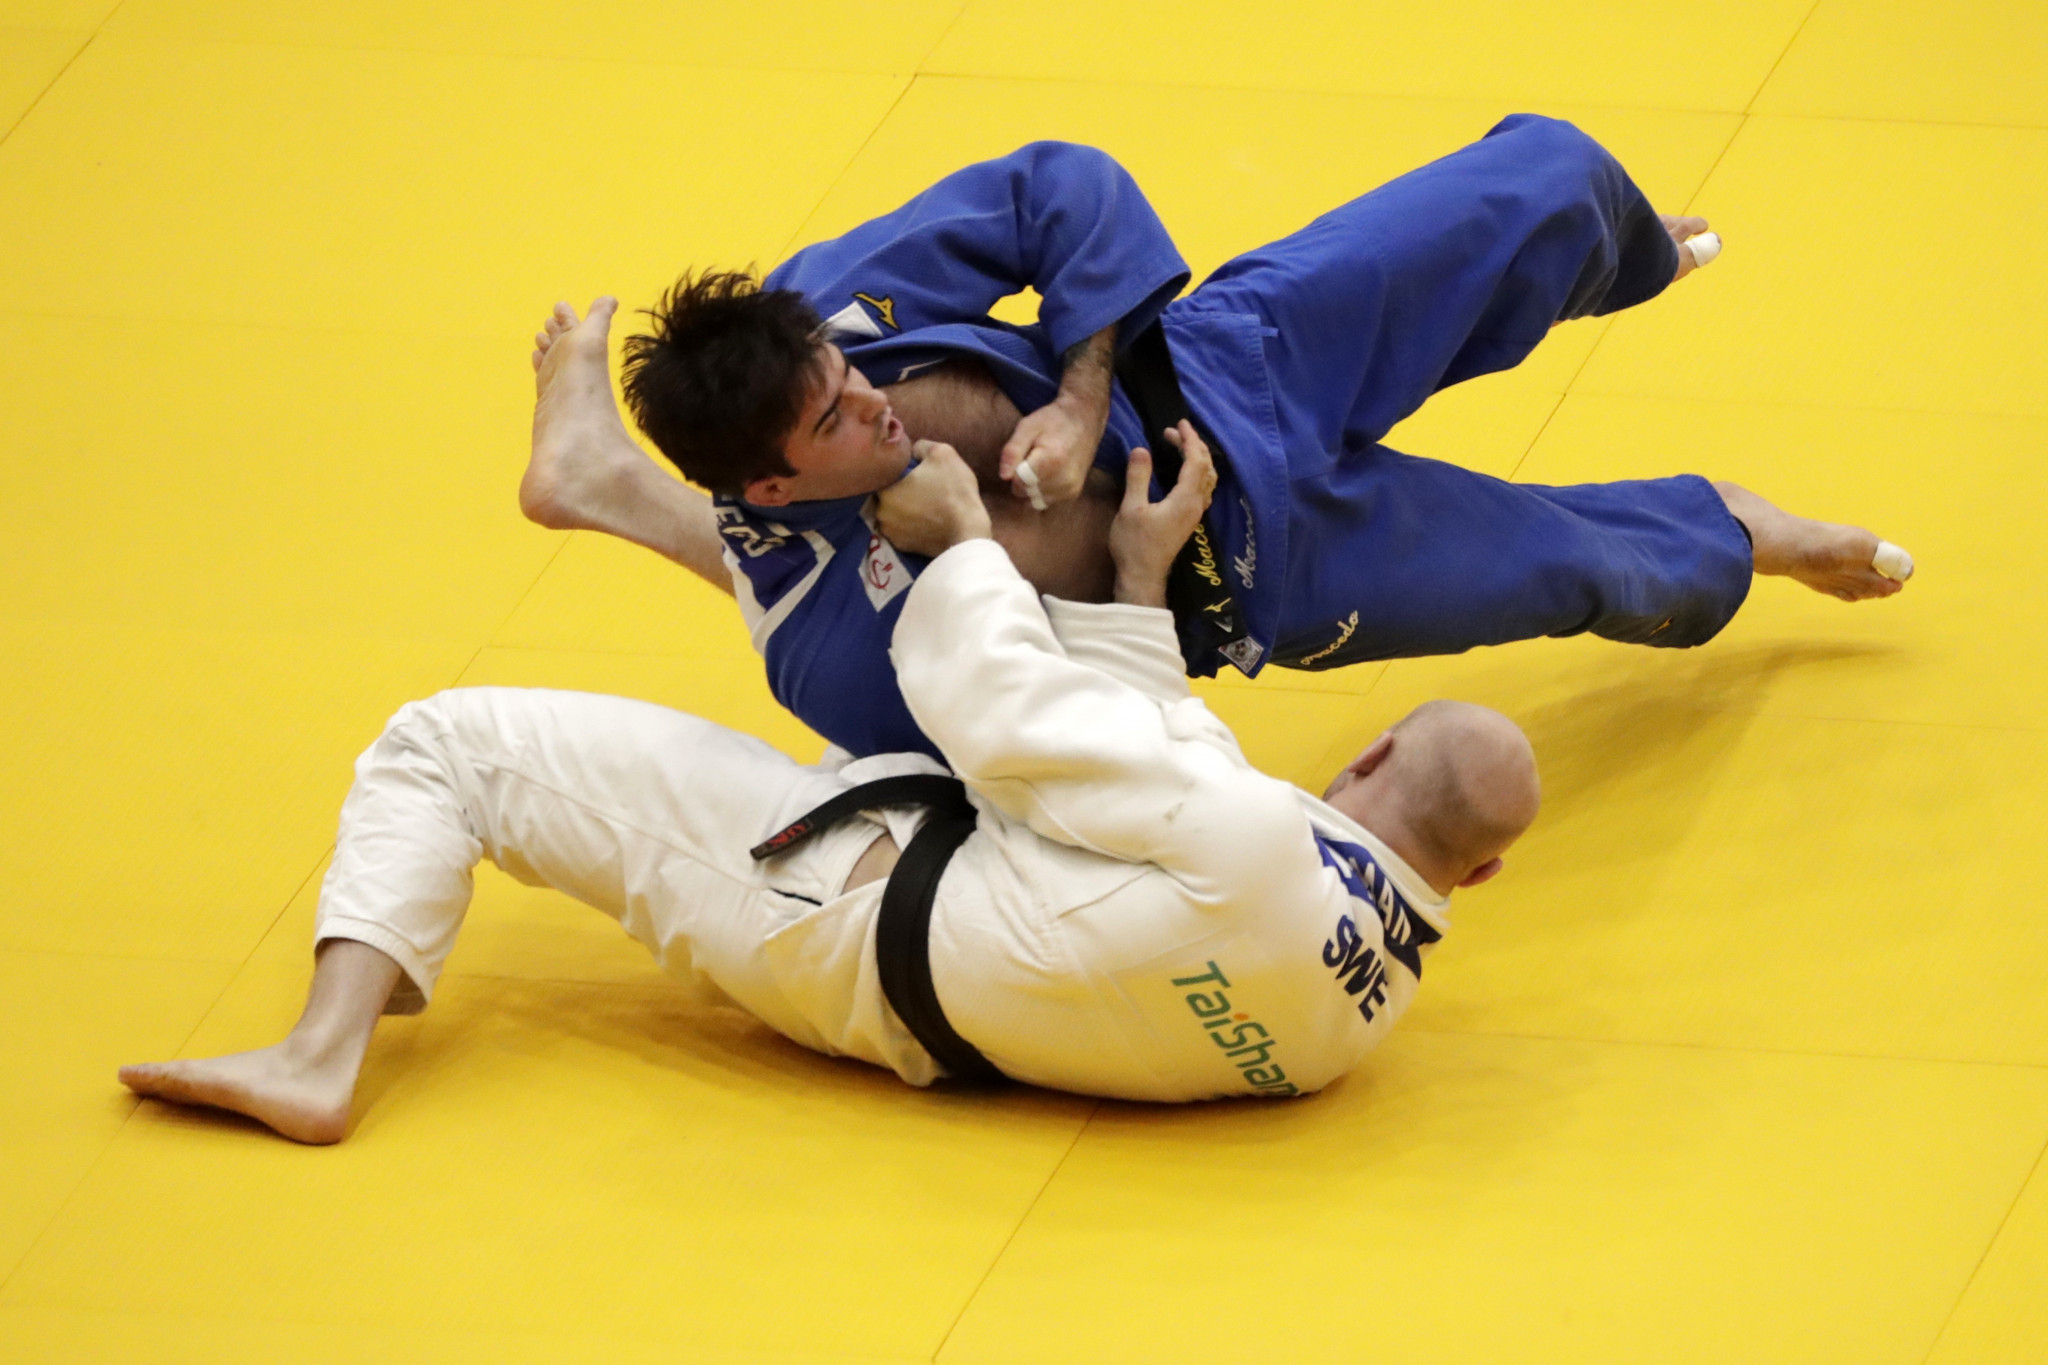 Under the new rules, judoka will receive a shido if they produce a reverse seoi nage ©Getty Images